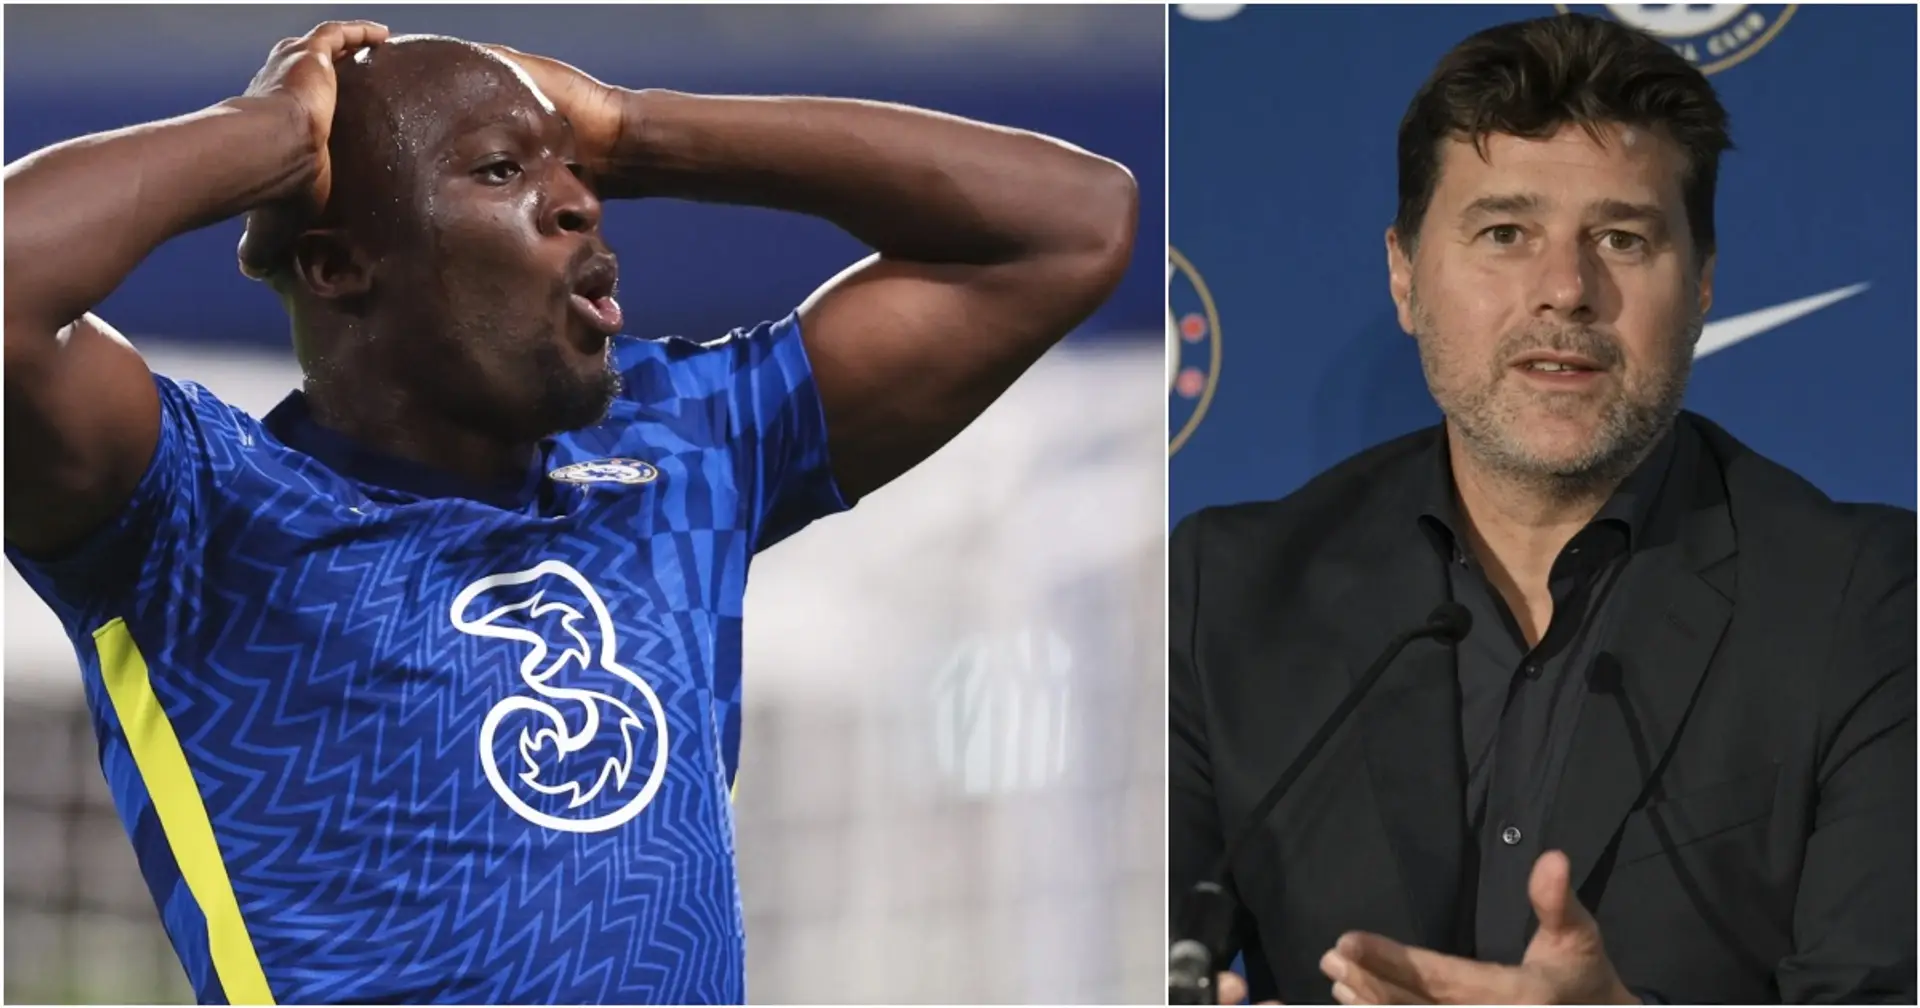 Chelsea ask €40m for Lukaku: how they can reinvest the money